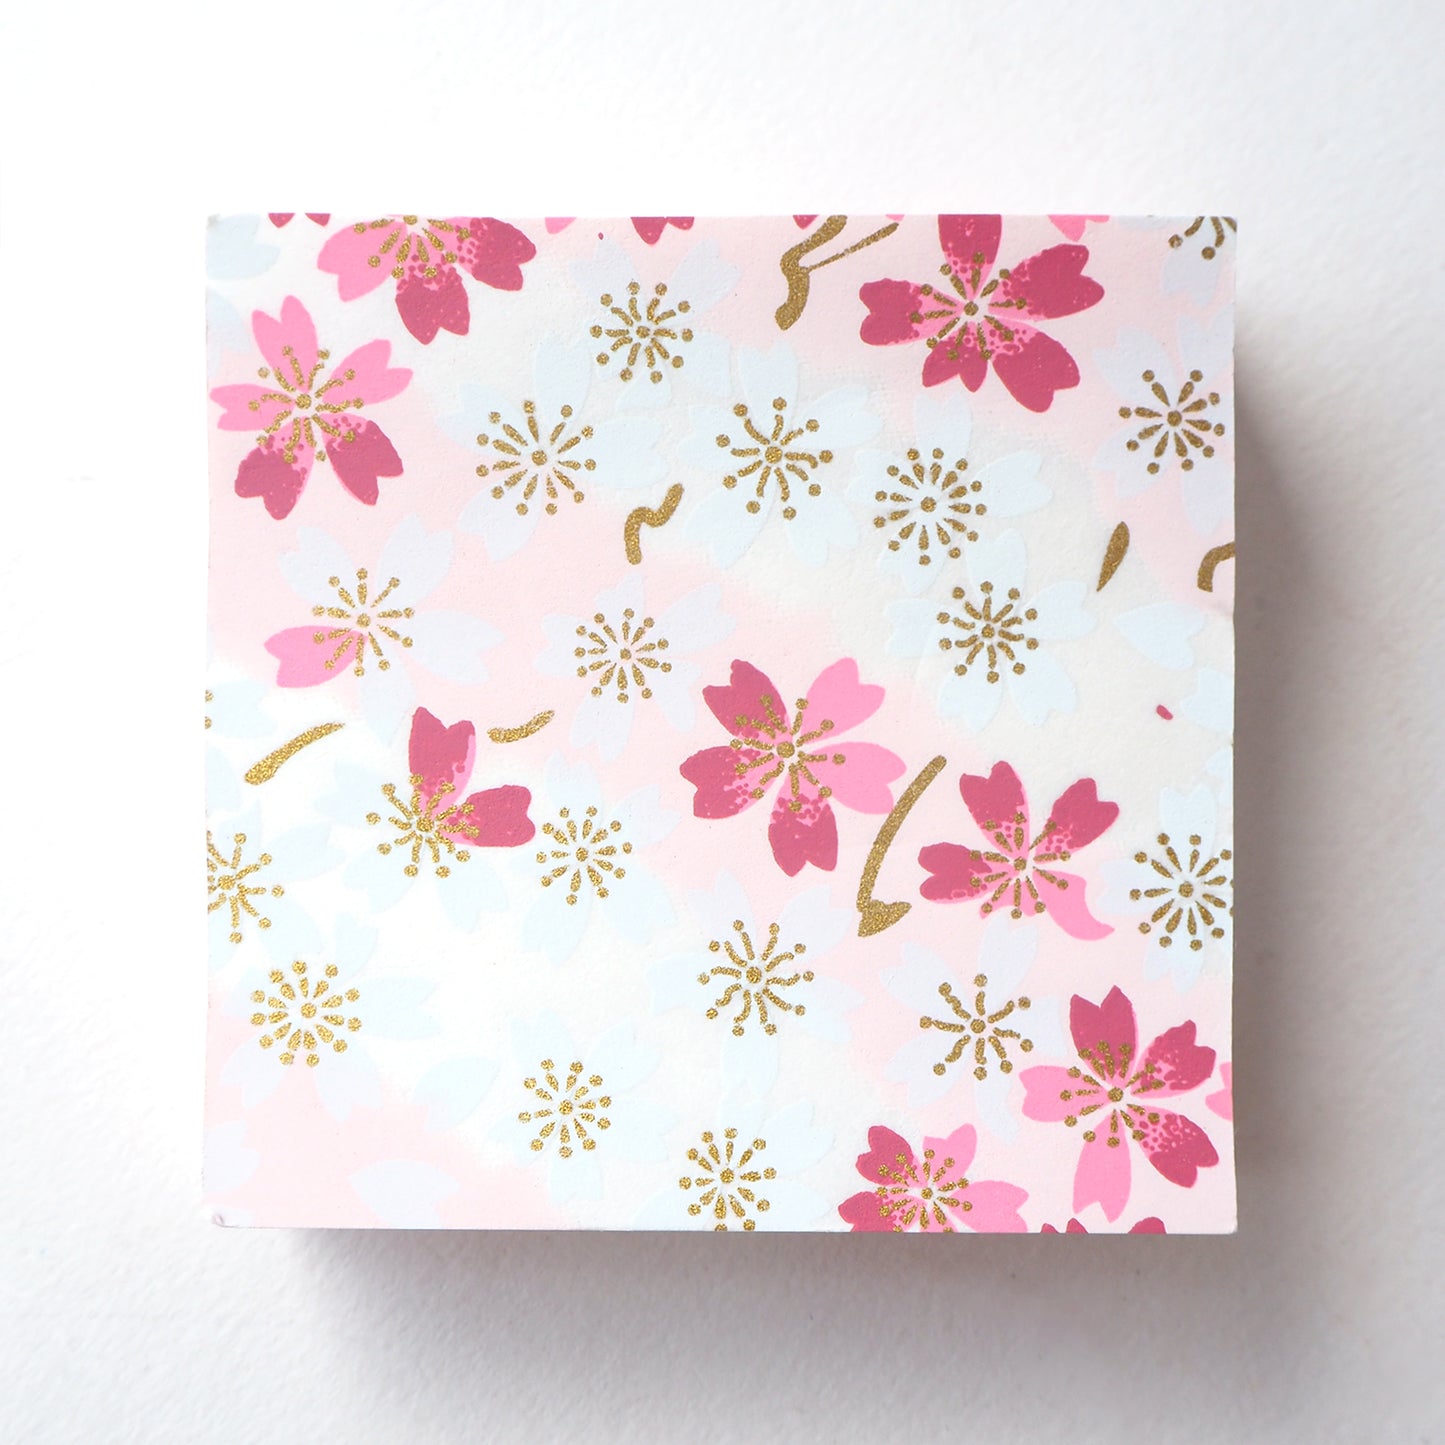 Pack of 100 Sheets 7x7cm Yuzen Washi Origami Paper HZ-334 - Cutie Cherry Blossom Pink - washi paper - Lavender Home London